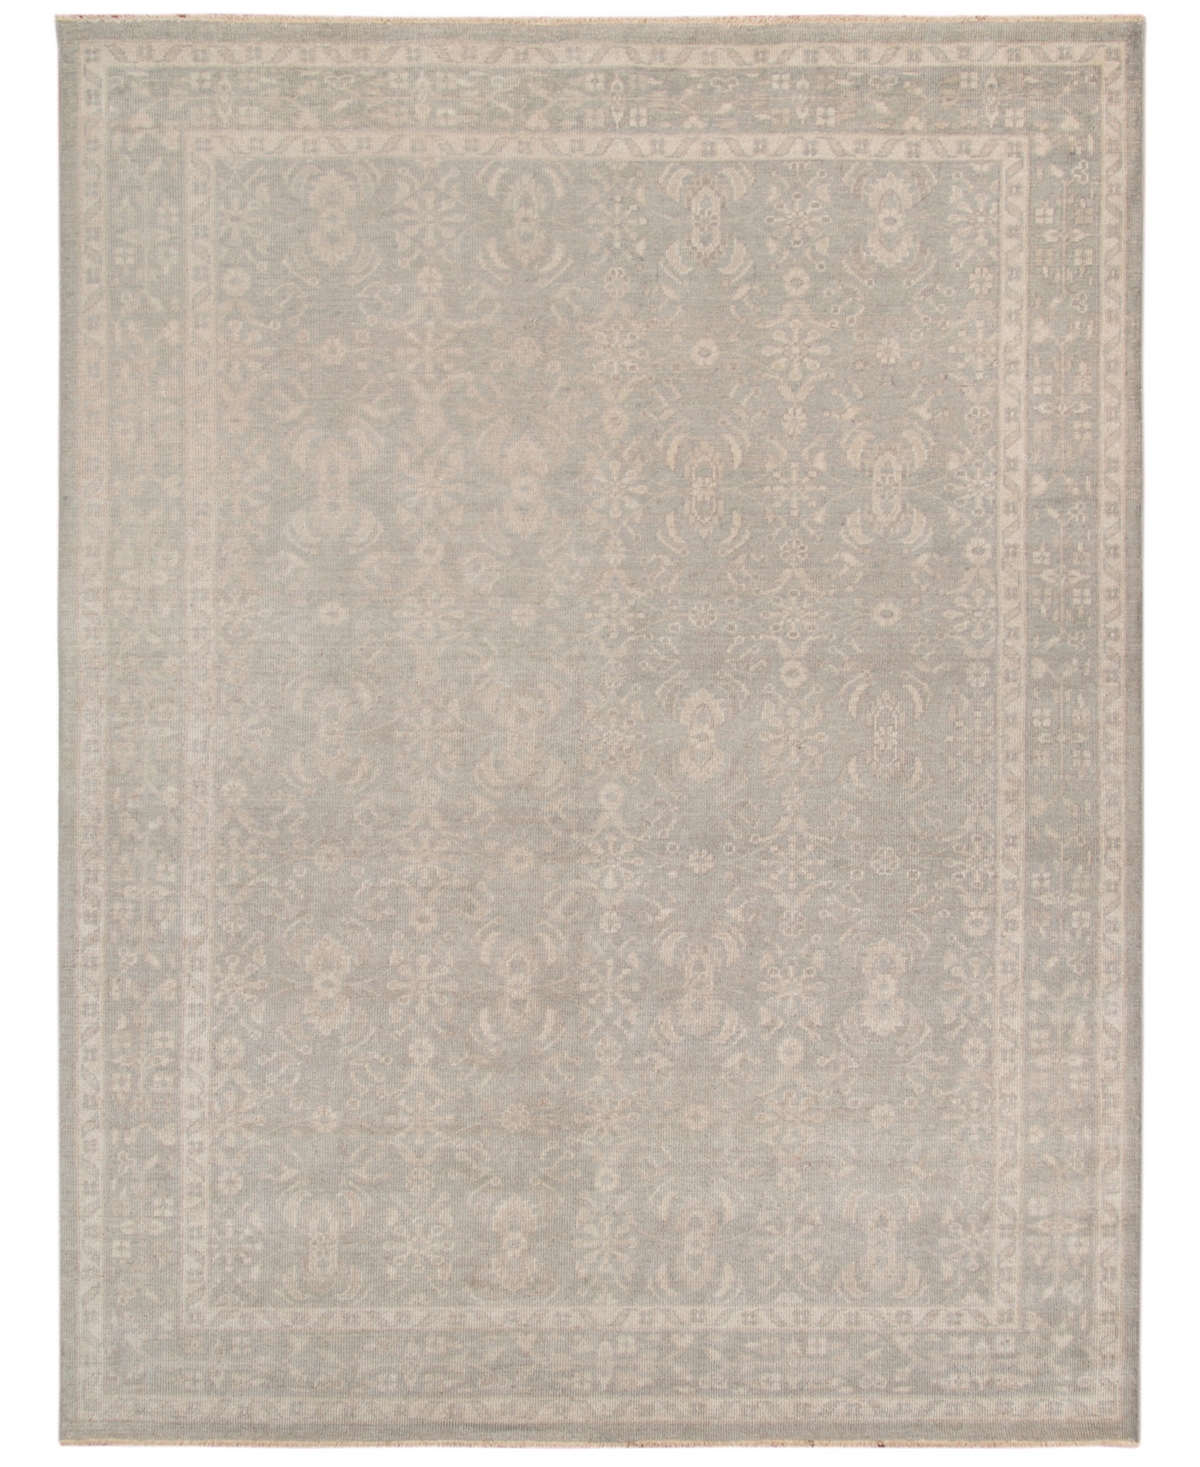 Amer Rugs Ainsley Willa 2' X 3' Area Rug In Mist